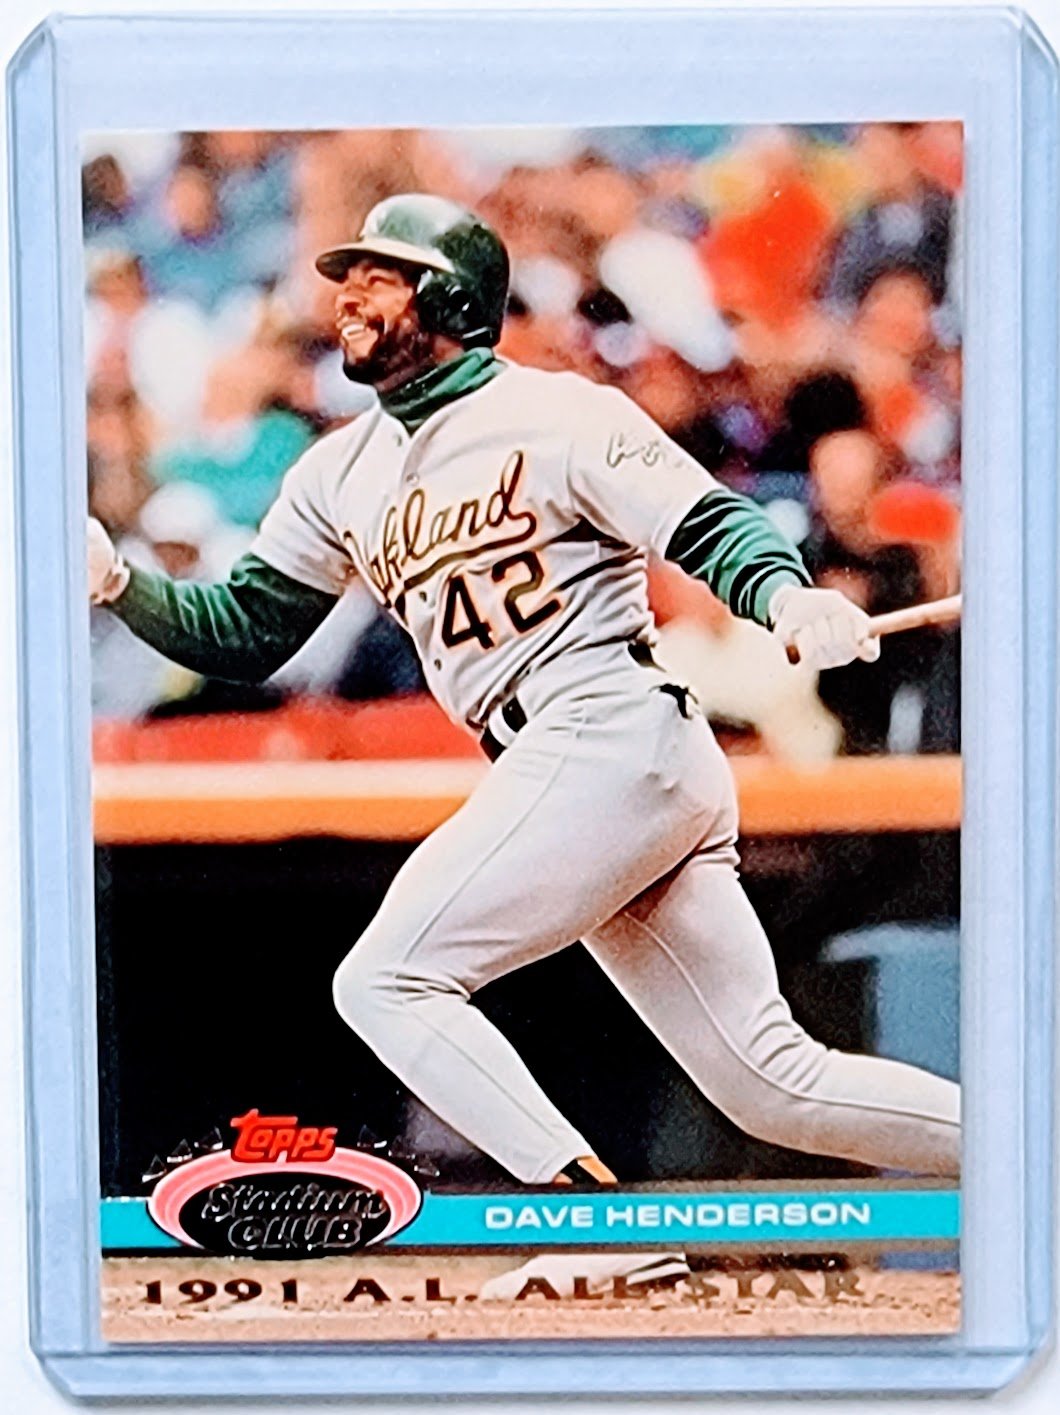 1992 Topps Stadium Club Dome Dave Henderson 1991 All Star MLB Baseball Trading Card TPTV simple Xclusive Collectibles   